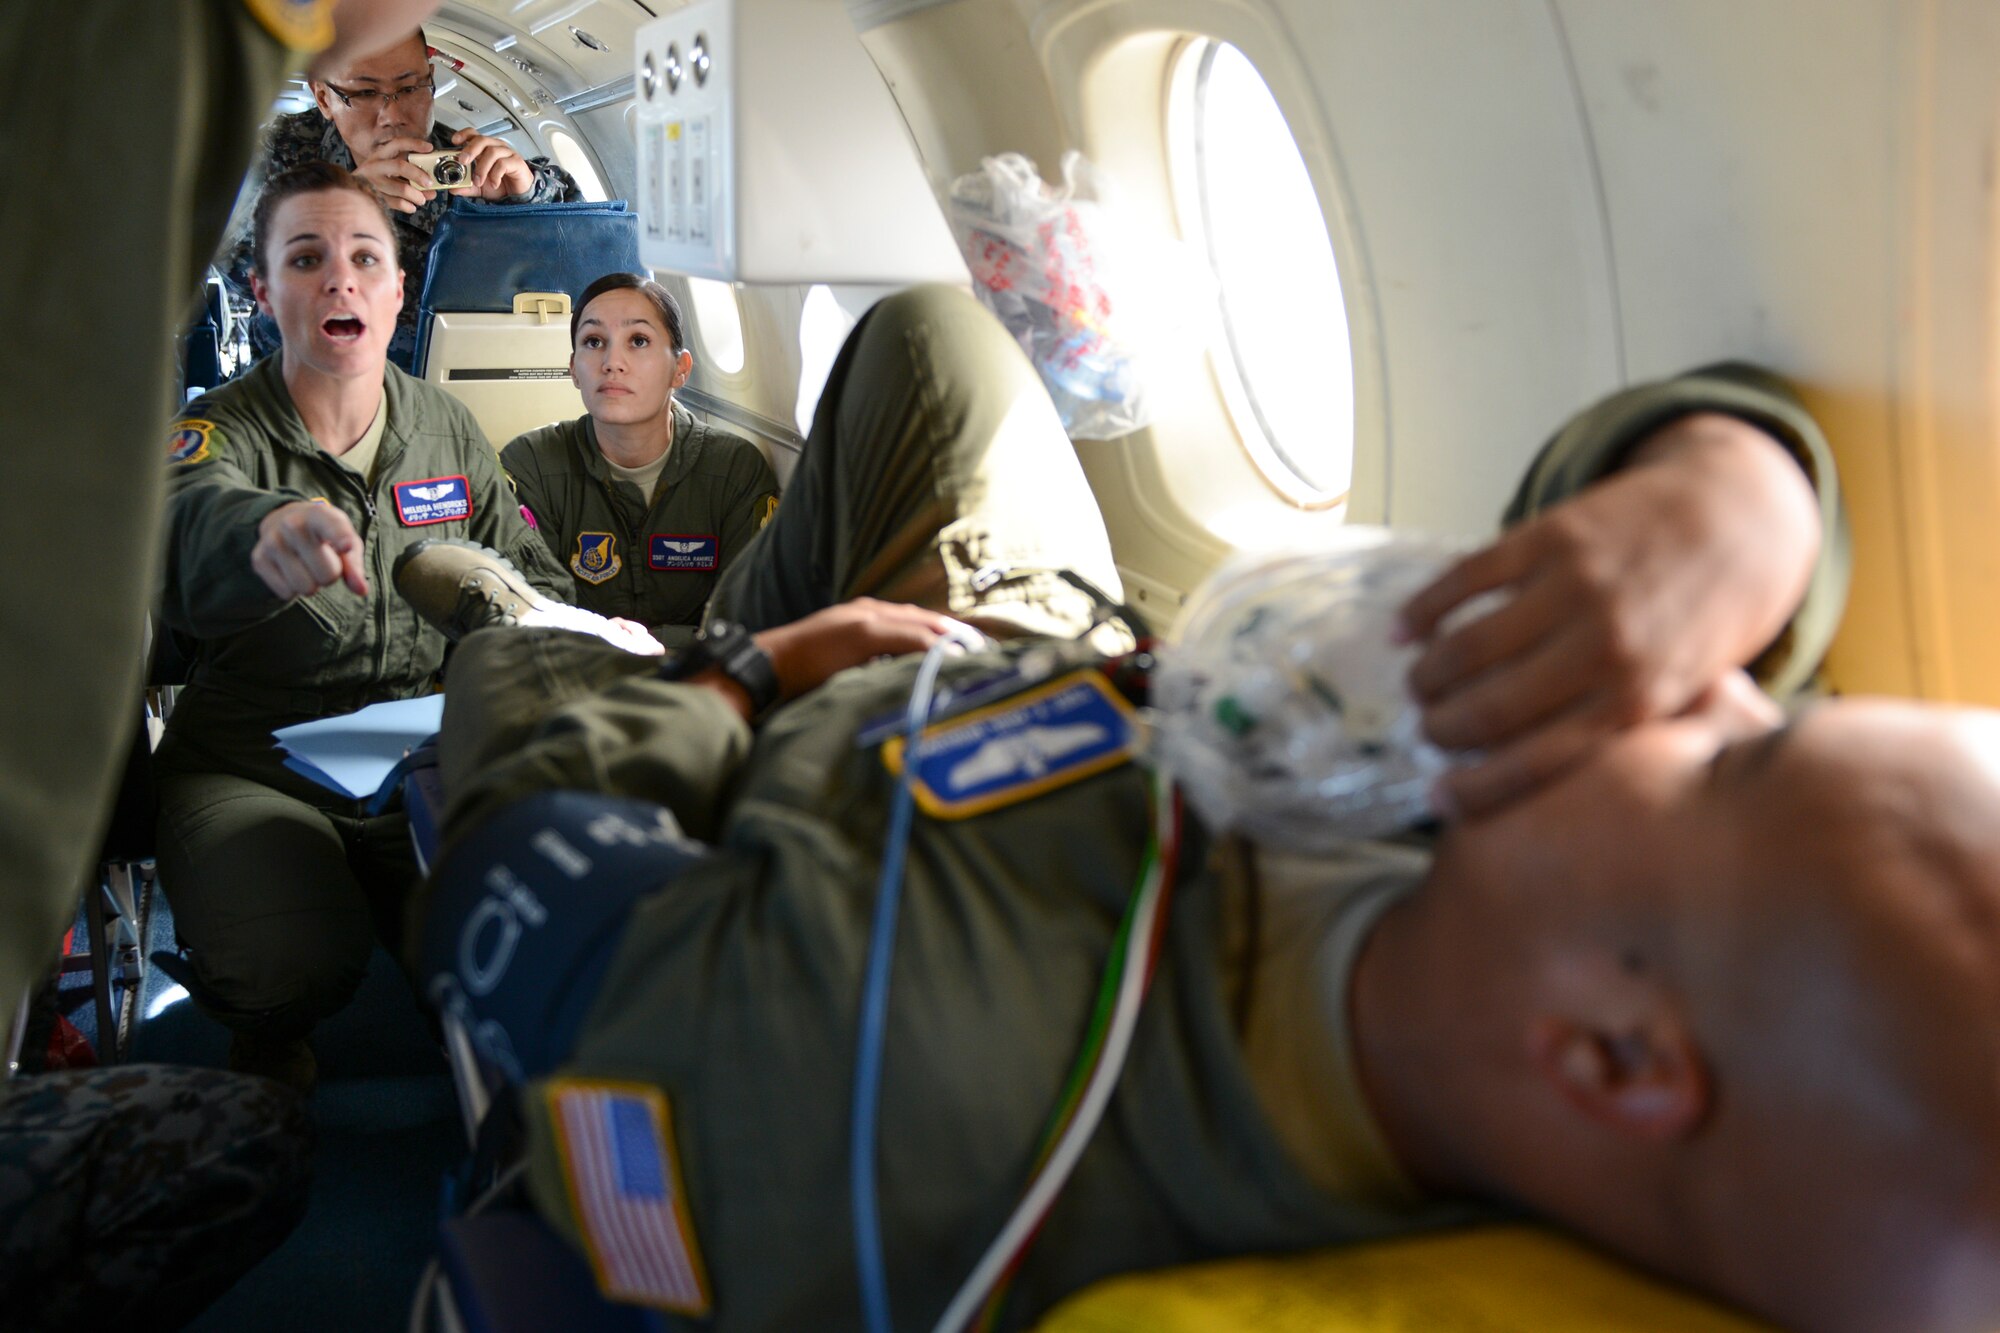 U.S. Air Force Capt. Melissa Hendricks (Left), 18th Aeromedical Evacuation Squadron flight commander, shouts to be heard over C-12 engines during a medical evacuation training scenario over Kadena Air Base, Japan, Sept. 24, 2014. The 459th Airlift Squadron flew the medical crew, allowing Japan Air Self-Defense Force and Pacific Air Force command members to observe the flight. (U.S. Air Force photo by Staff Sgt. Cody H.Ramirez/Released)